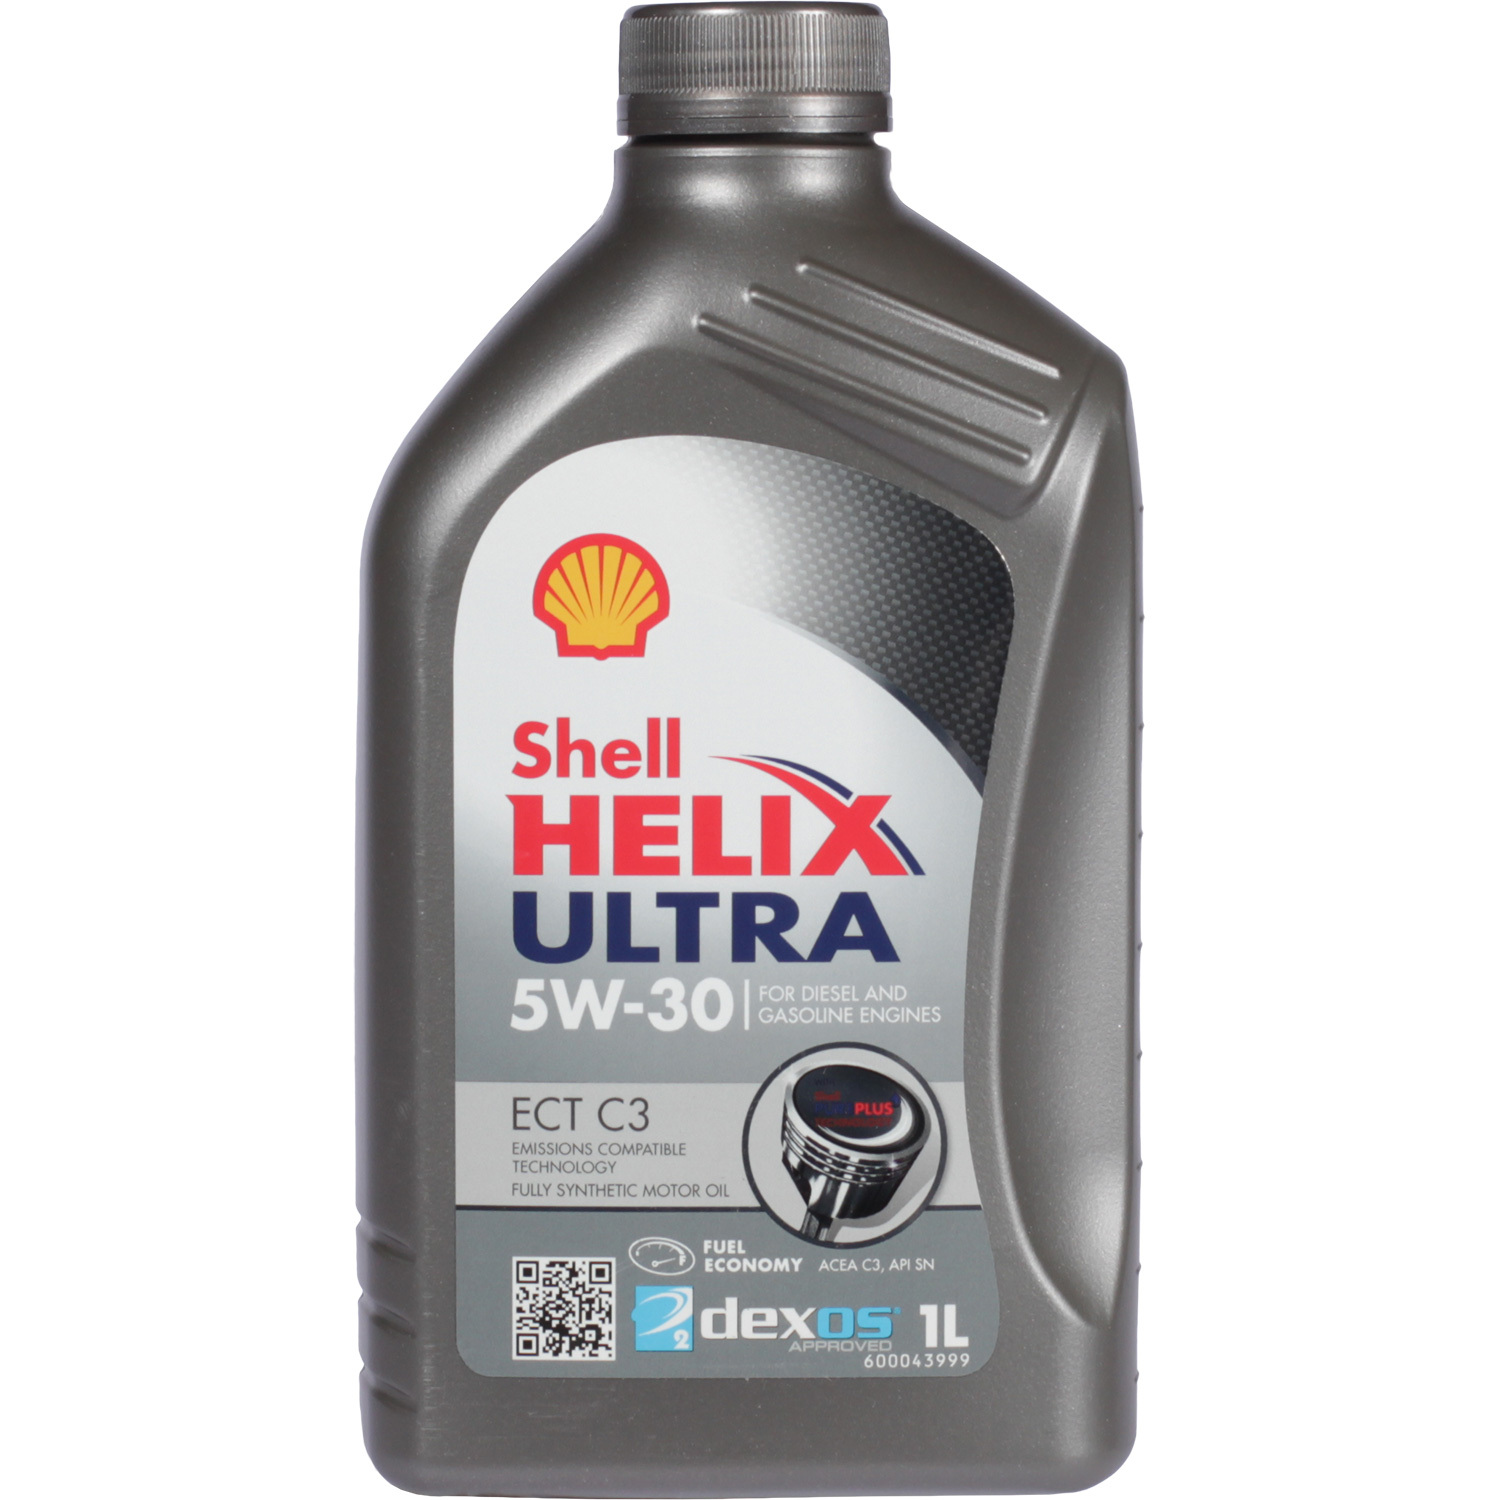 Shell Моторное масло Shell Helix Ultra ECT С3 5W-30, 1 л масло моторное shell helix ultra 5w 30 4 л